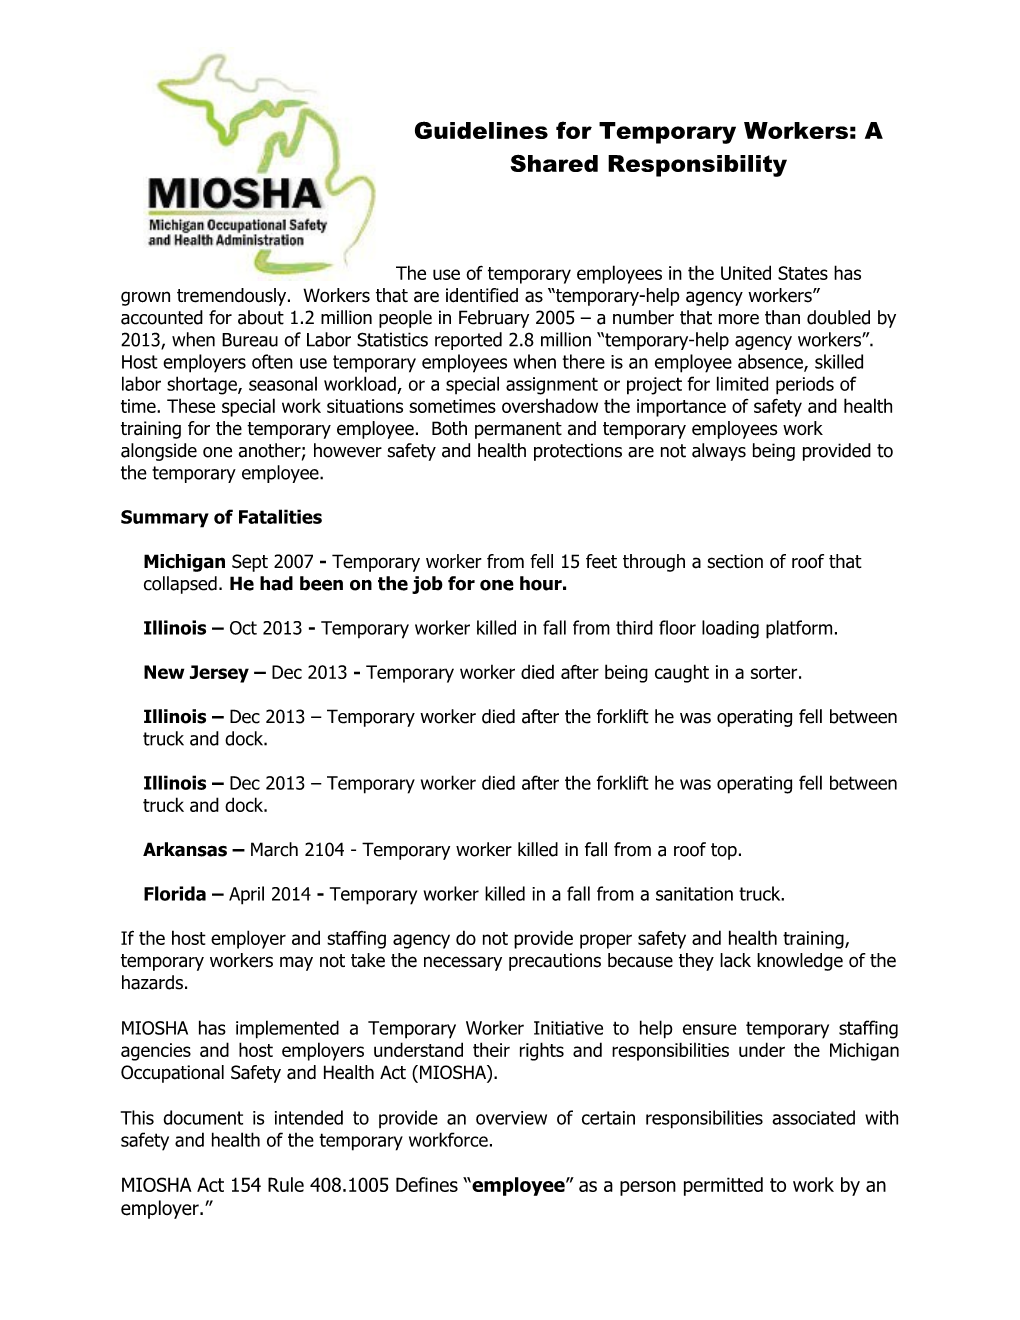 Guidelines for Temporary Workers: a Shared Responsibility